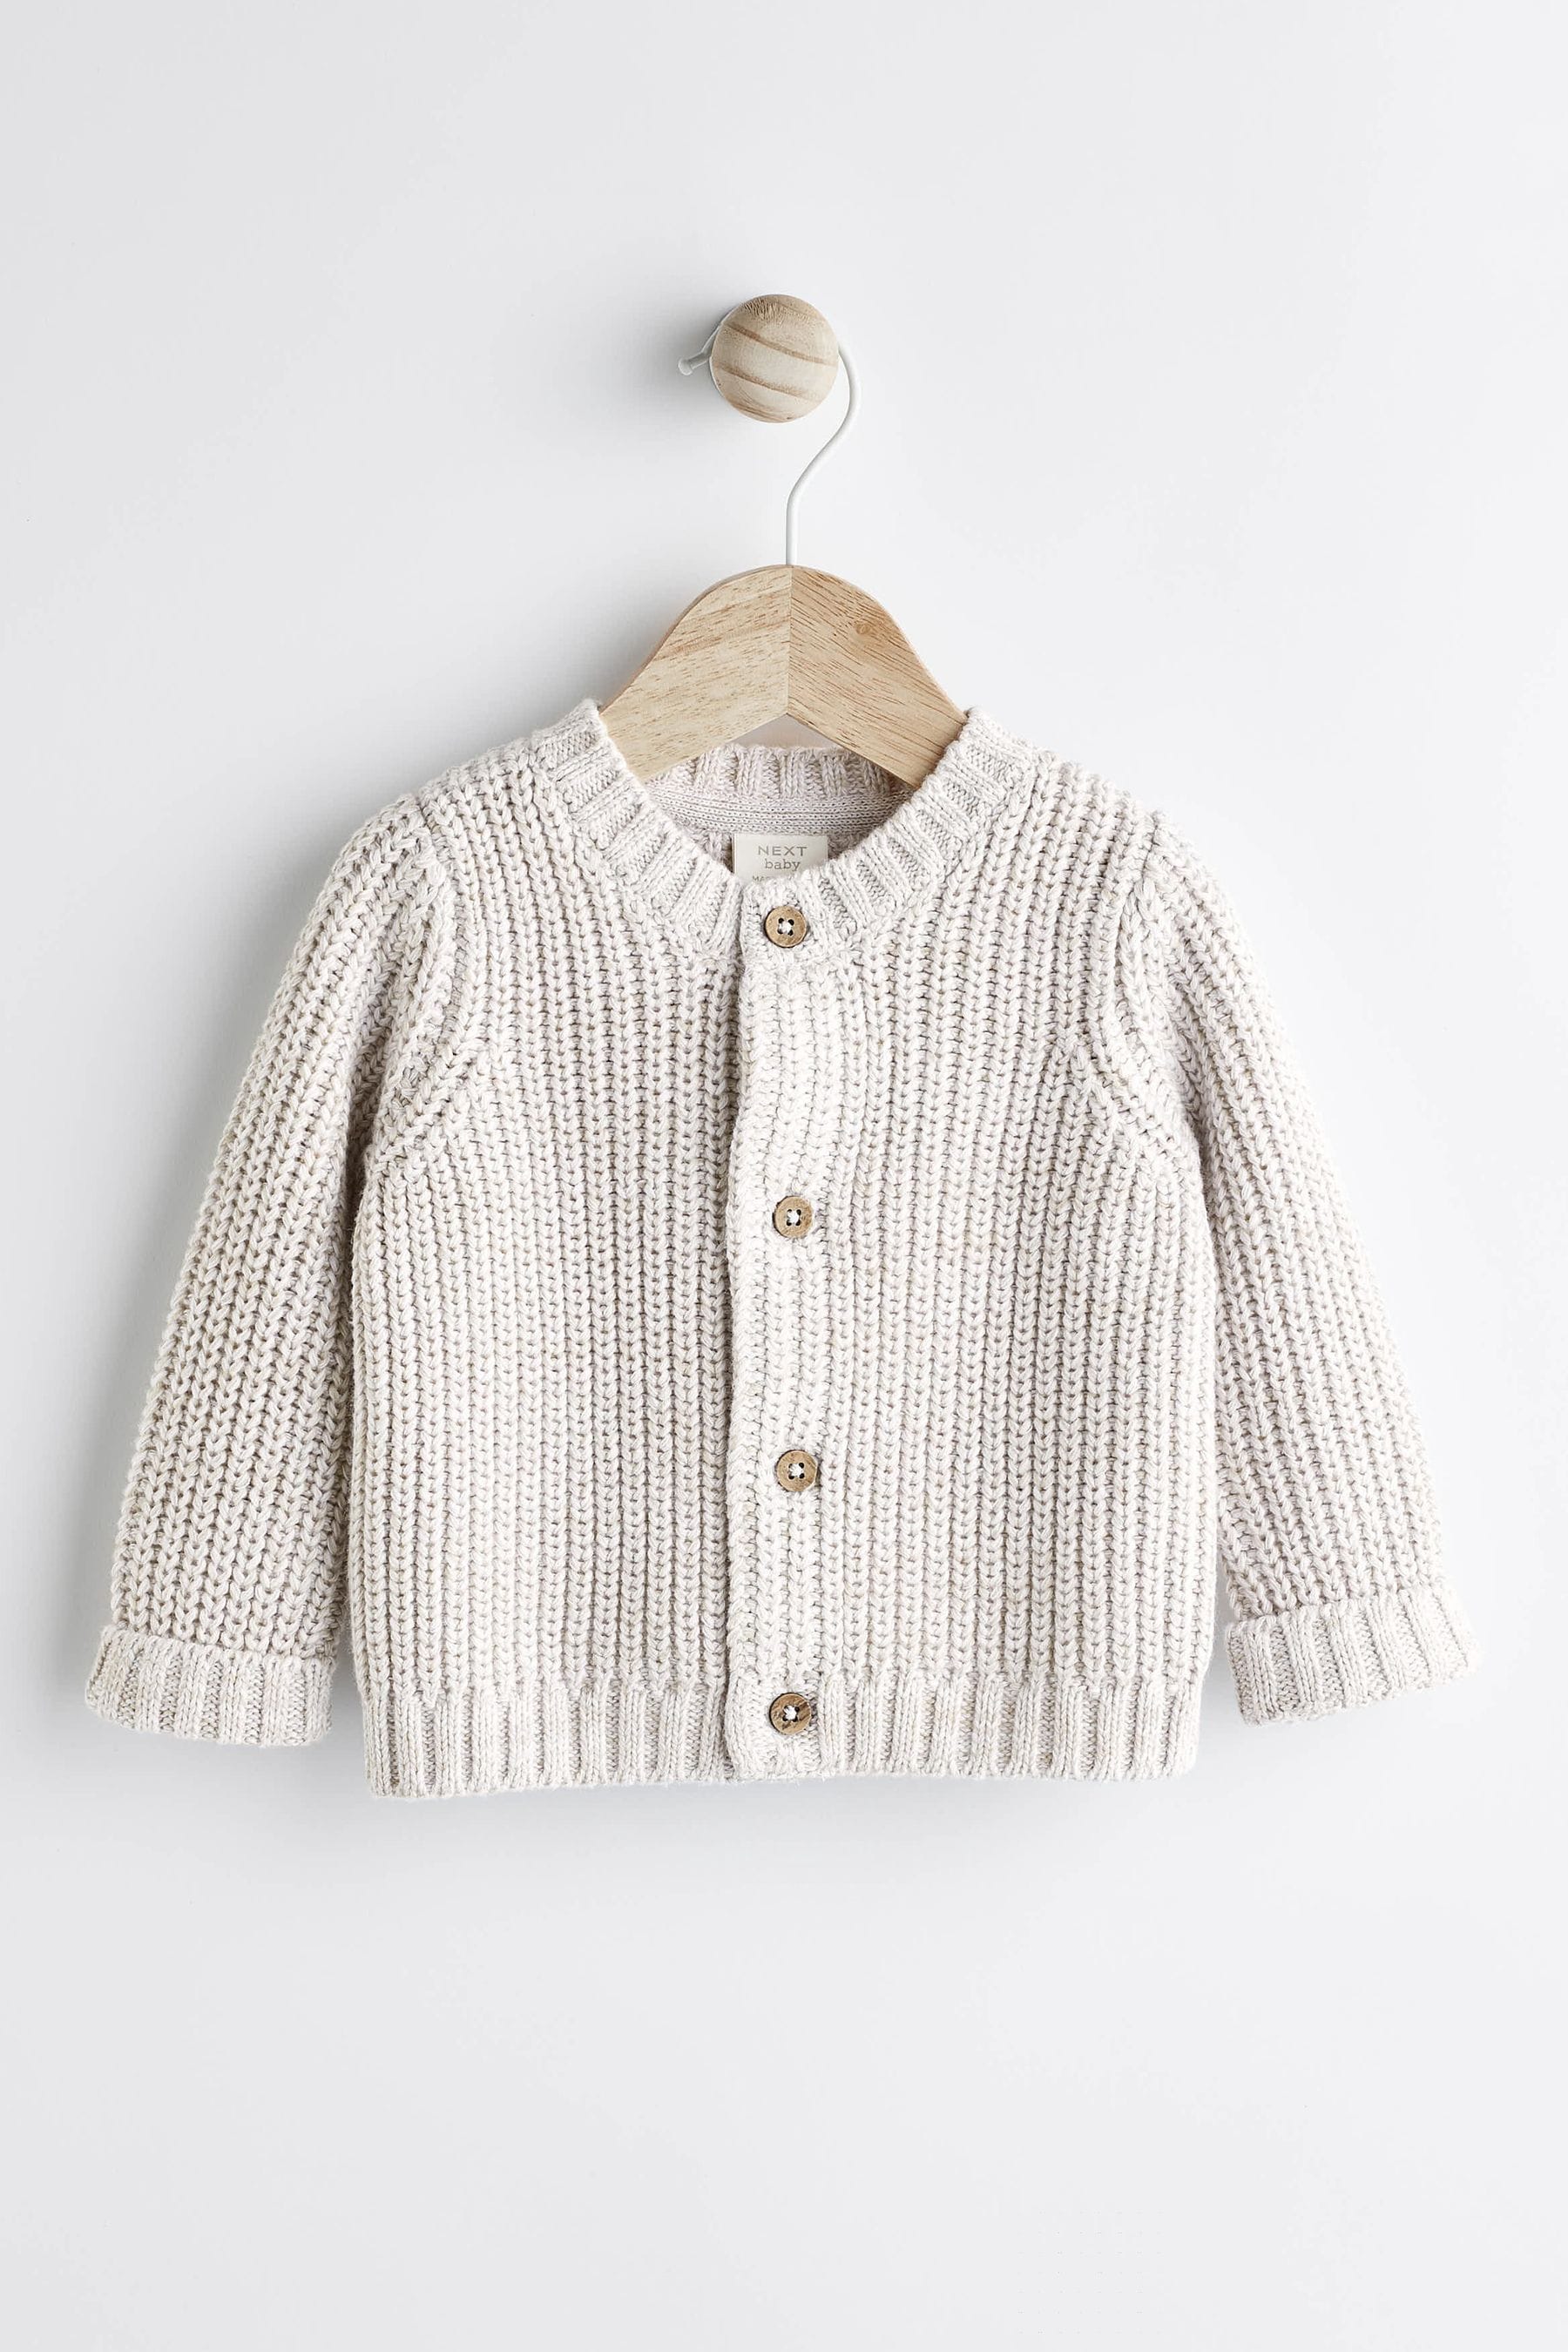 Buy Cream Born in 2024 Chunky Knitted Baby Embroided Cardigan from the ...